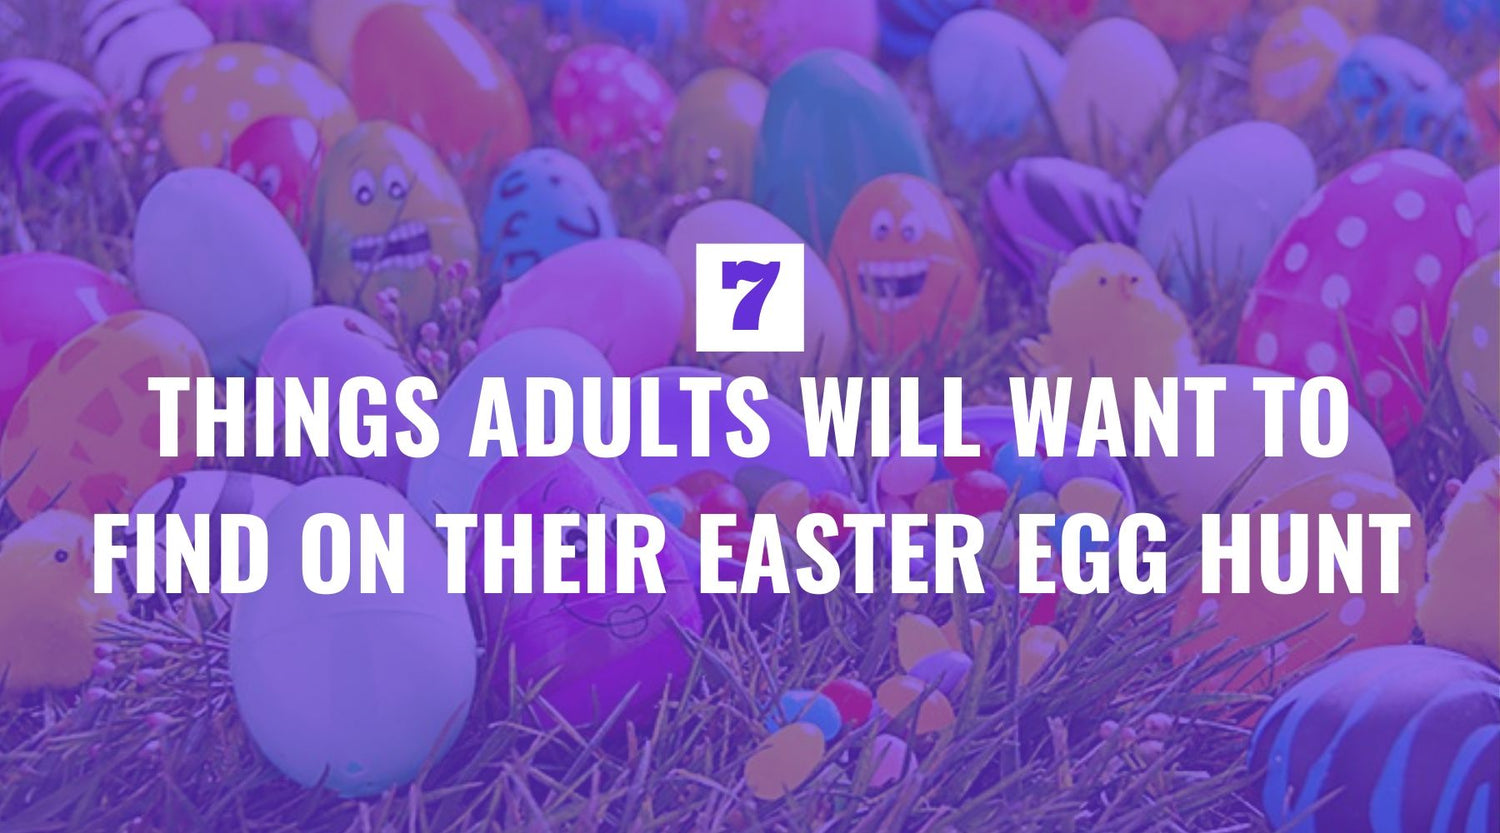 Seven Things Adults Will Want to Find on Their Easter Egg Hunt